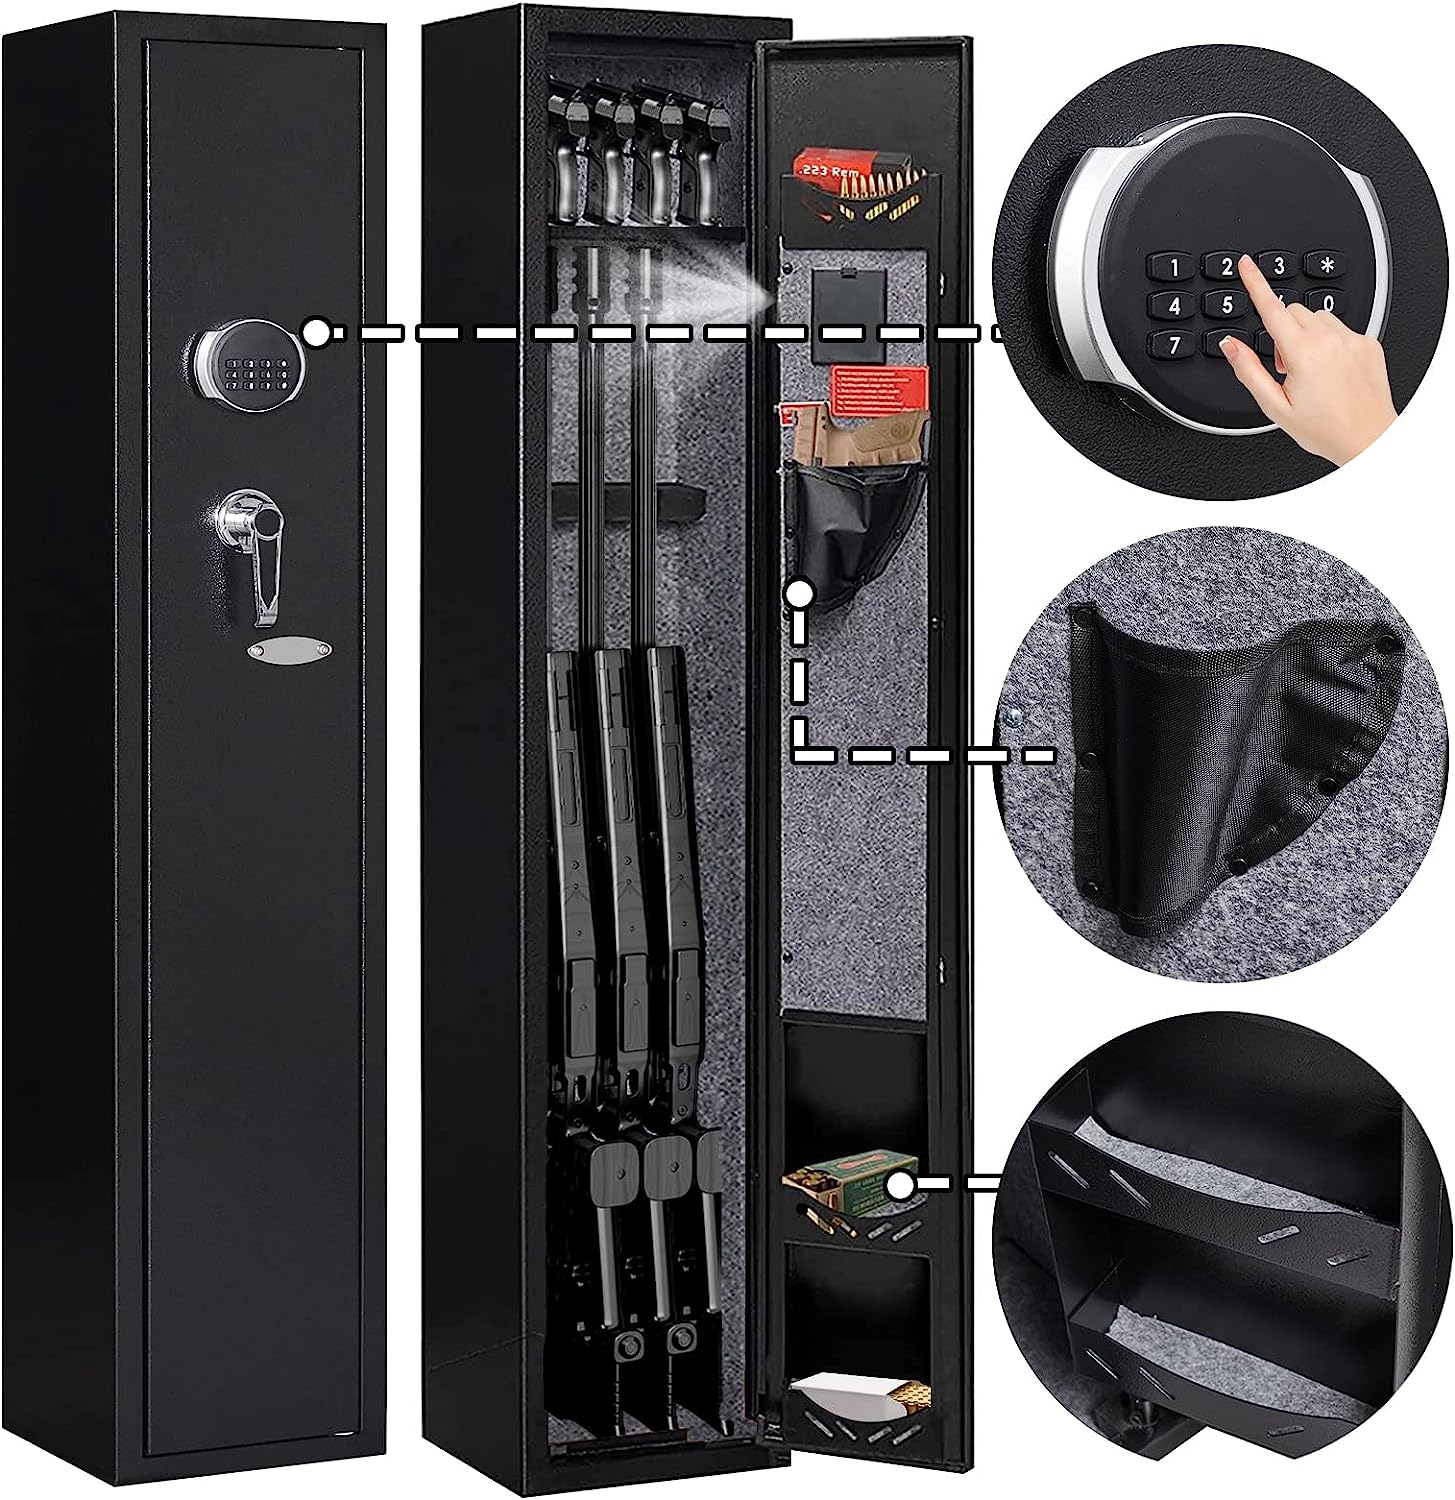 KAER 2-Gun Safes for Home Rifle and Pistols Electronic [...]